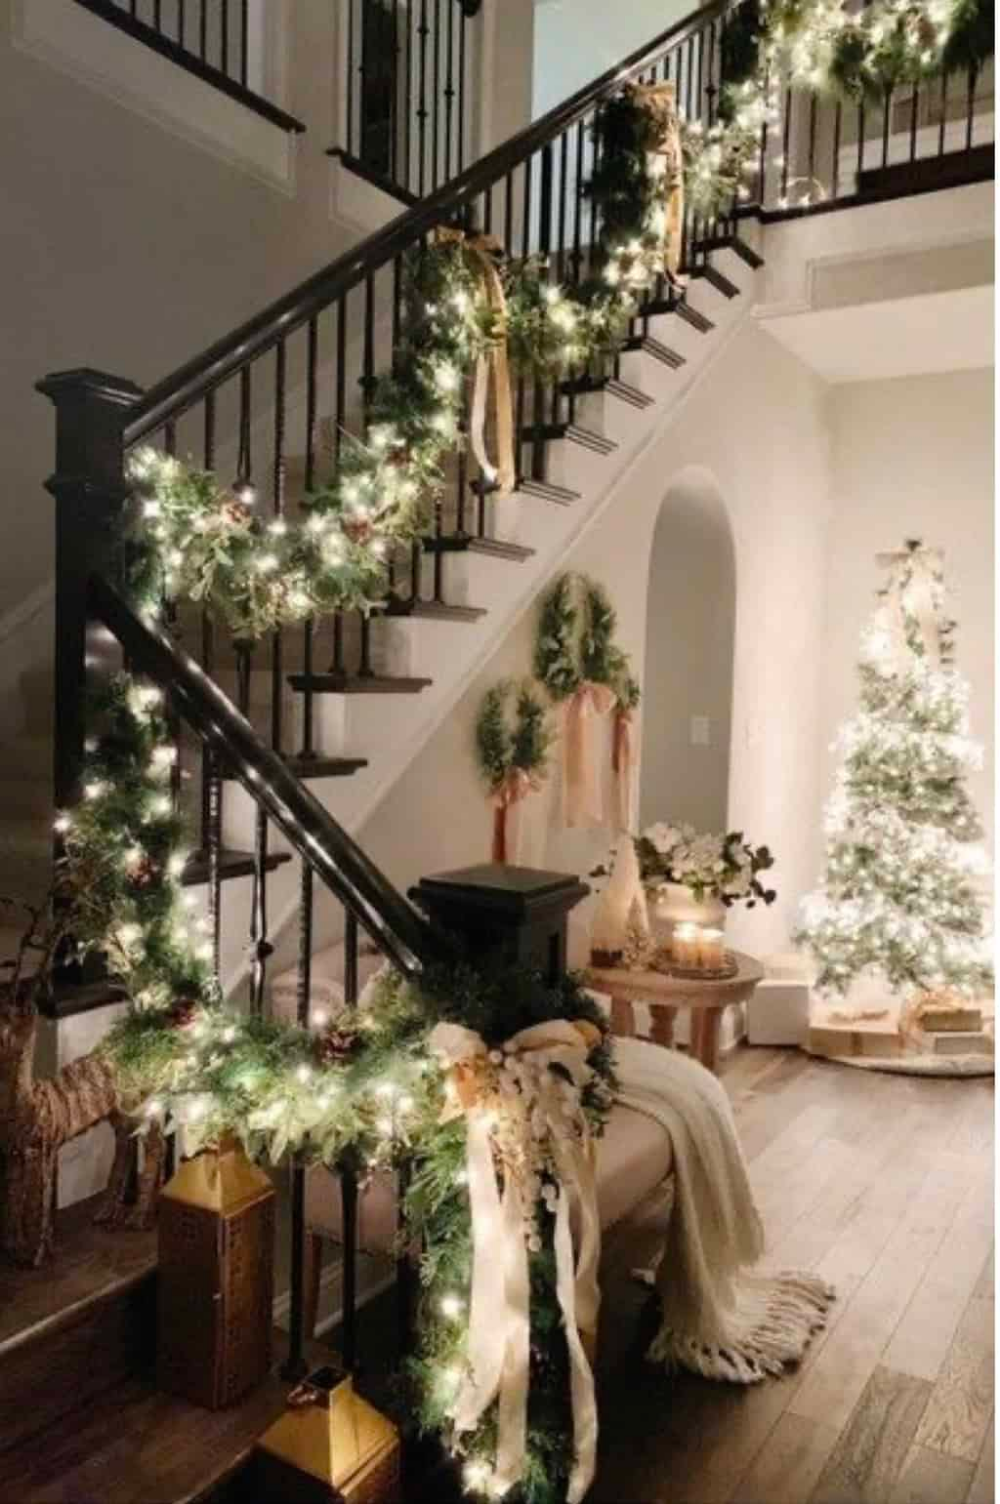 Christmas Decor We Are Drooling Over in 2020 -   19 christmas decor wreaths & garlands ideas